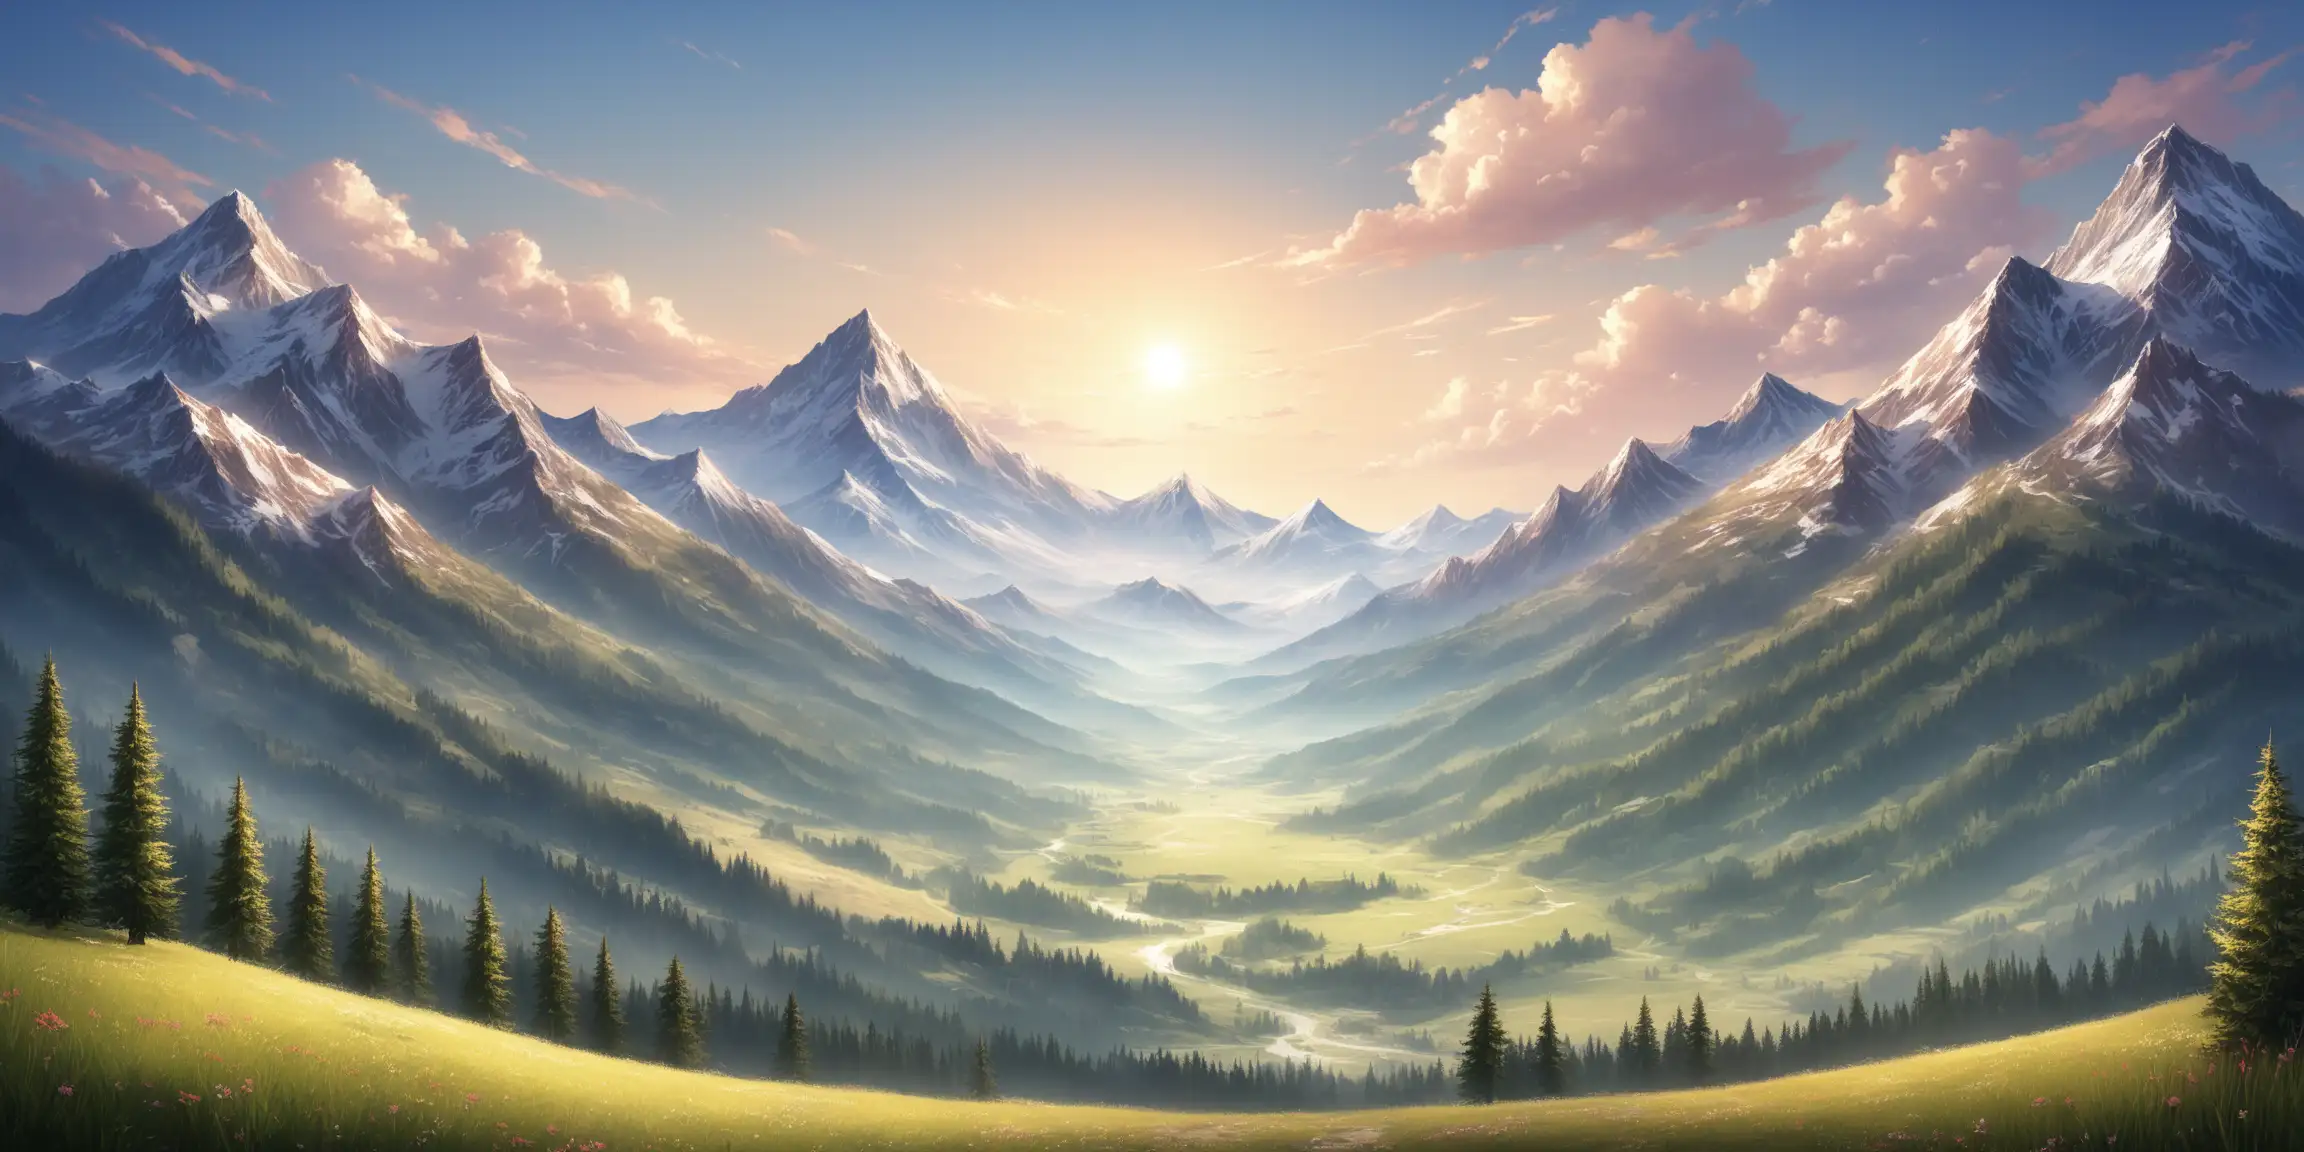 Majestic Mountain Landscape with Lush Pine Forest